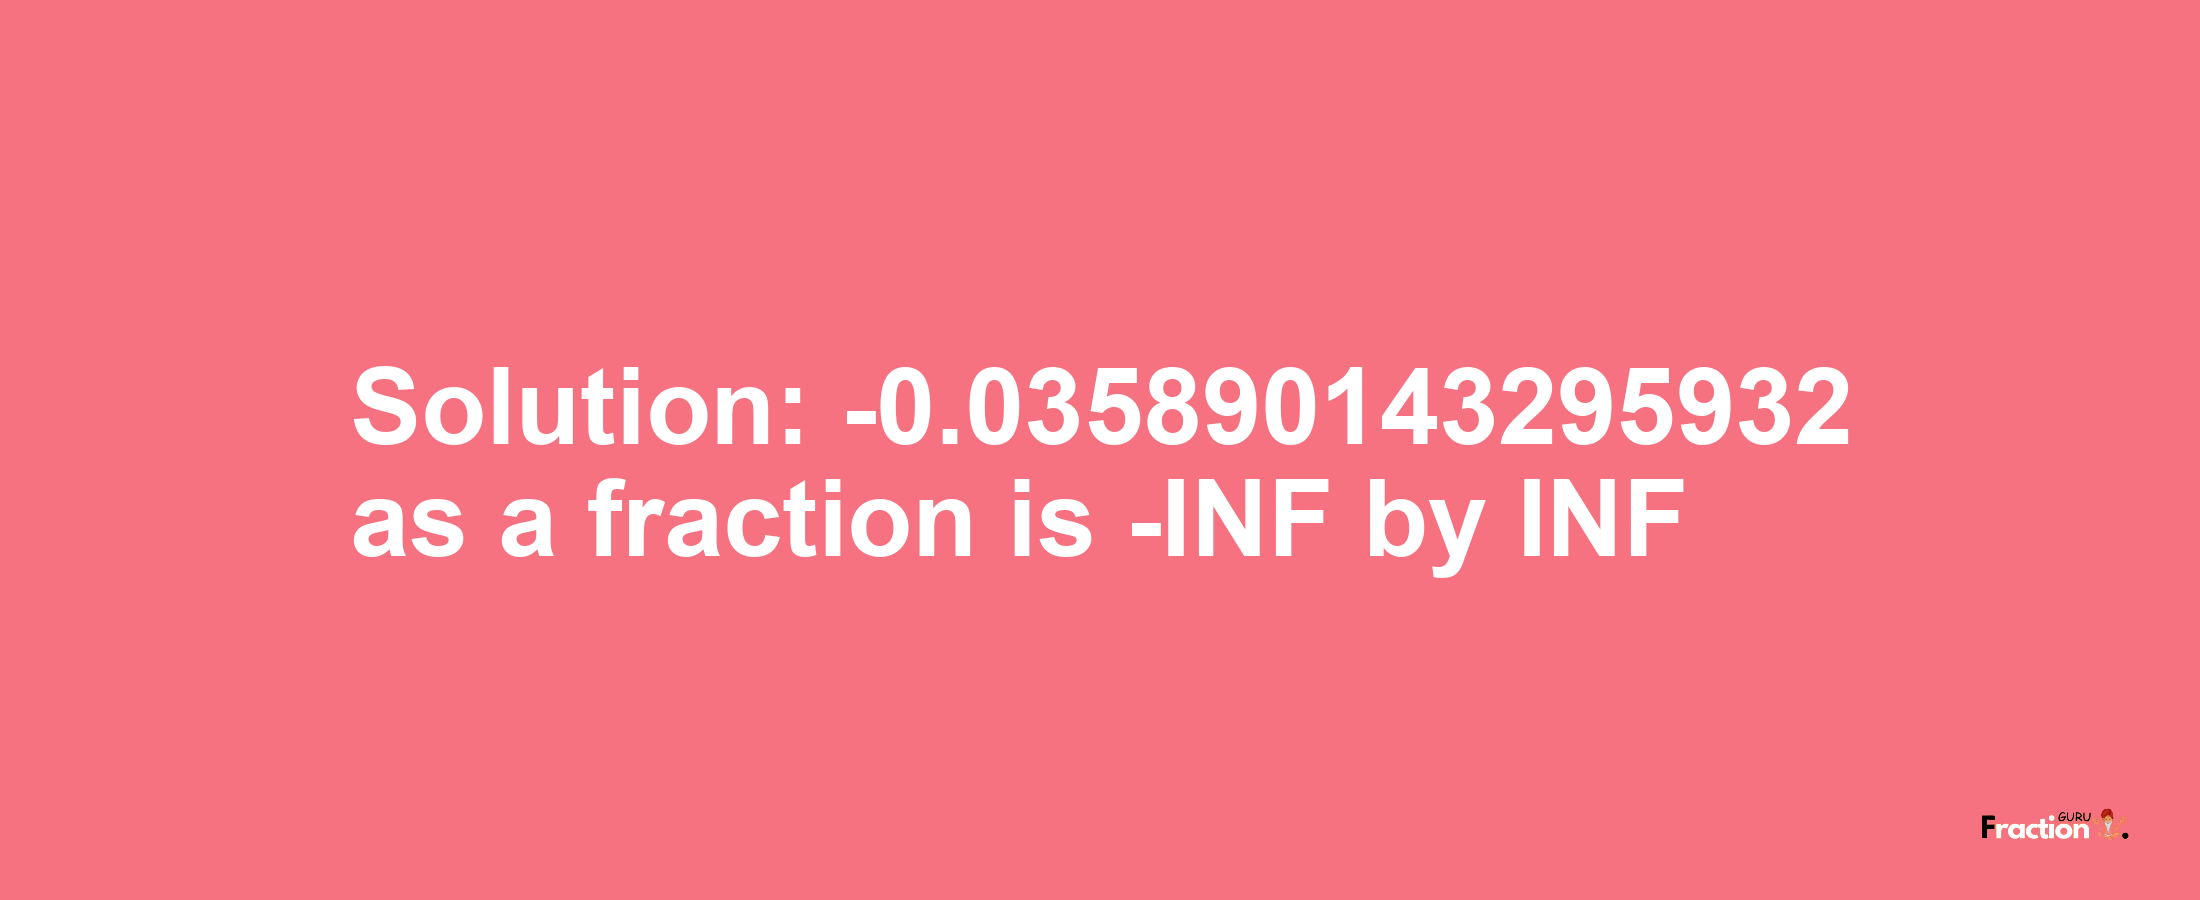 Solution:-0.035890143295932 as a fraction is -INF/INF